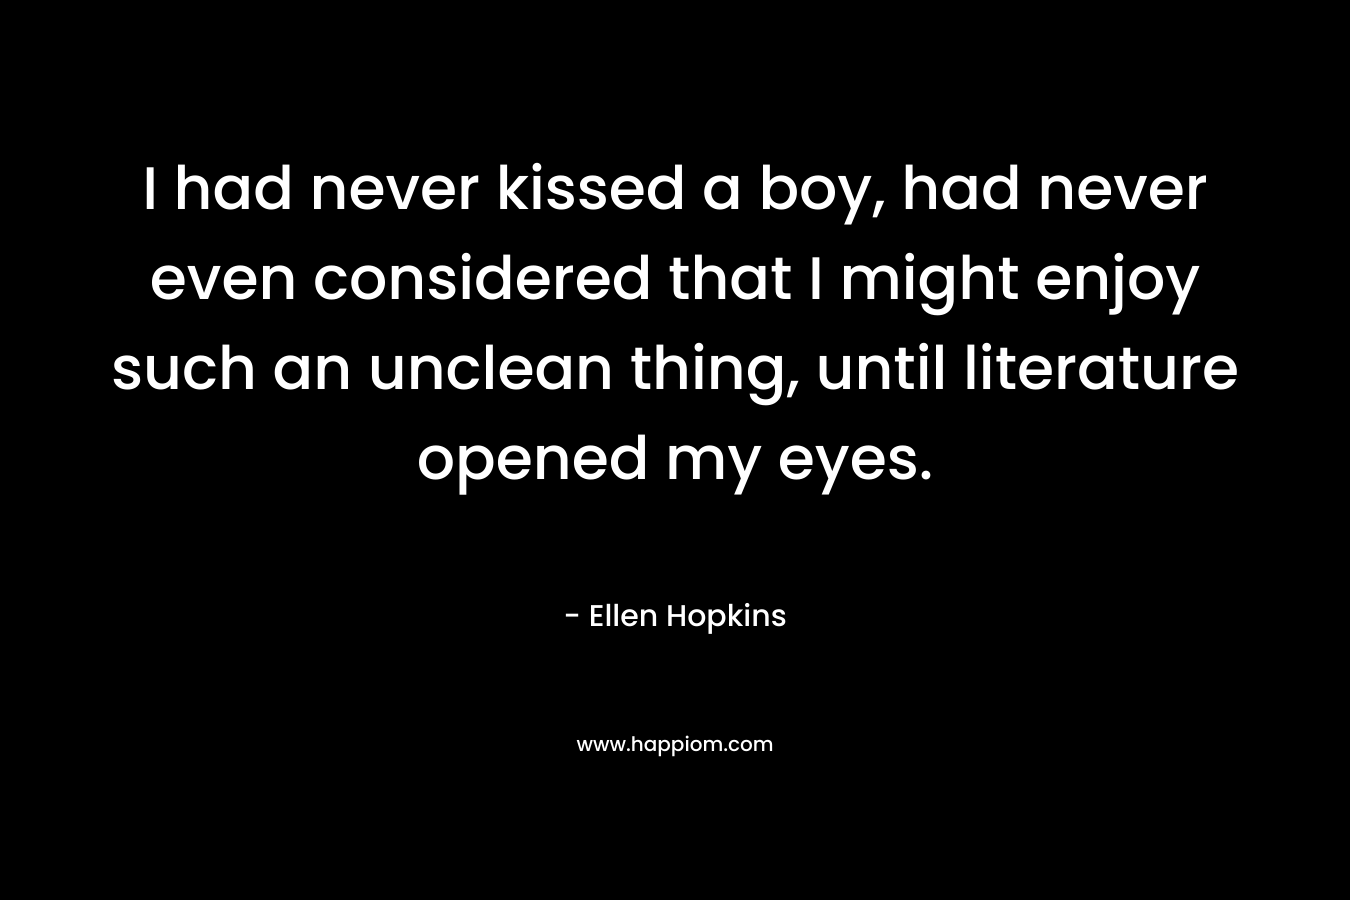 I had never kissed a boy, had never even considered that I might enjoy such an unclean thing, until literature opened my eyes. – Ellen Hopkins